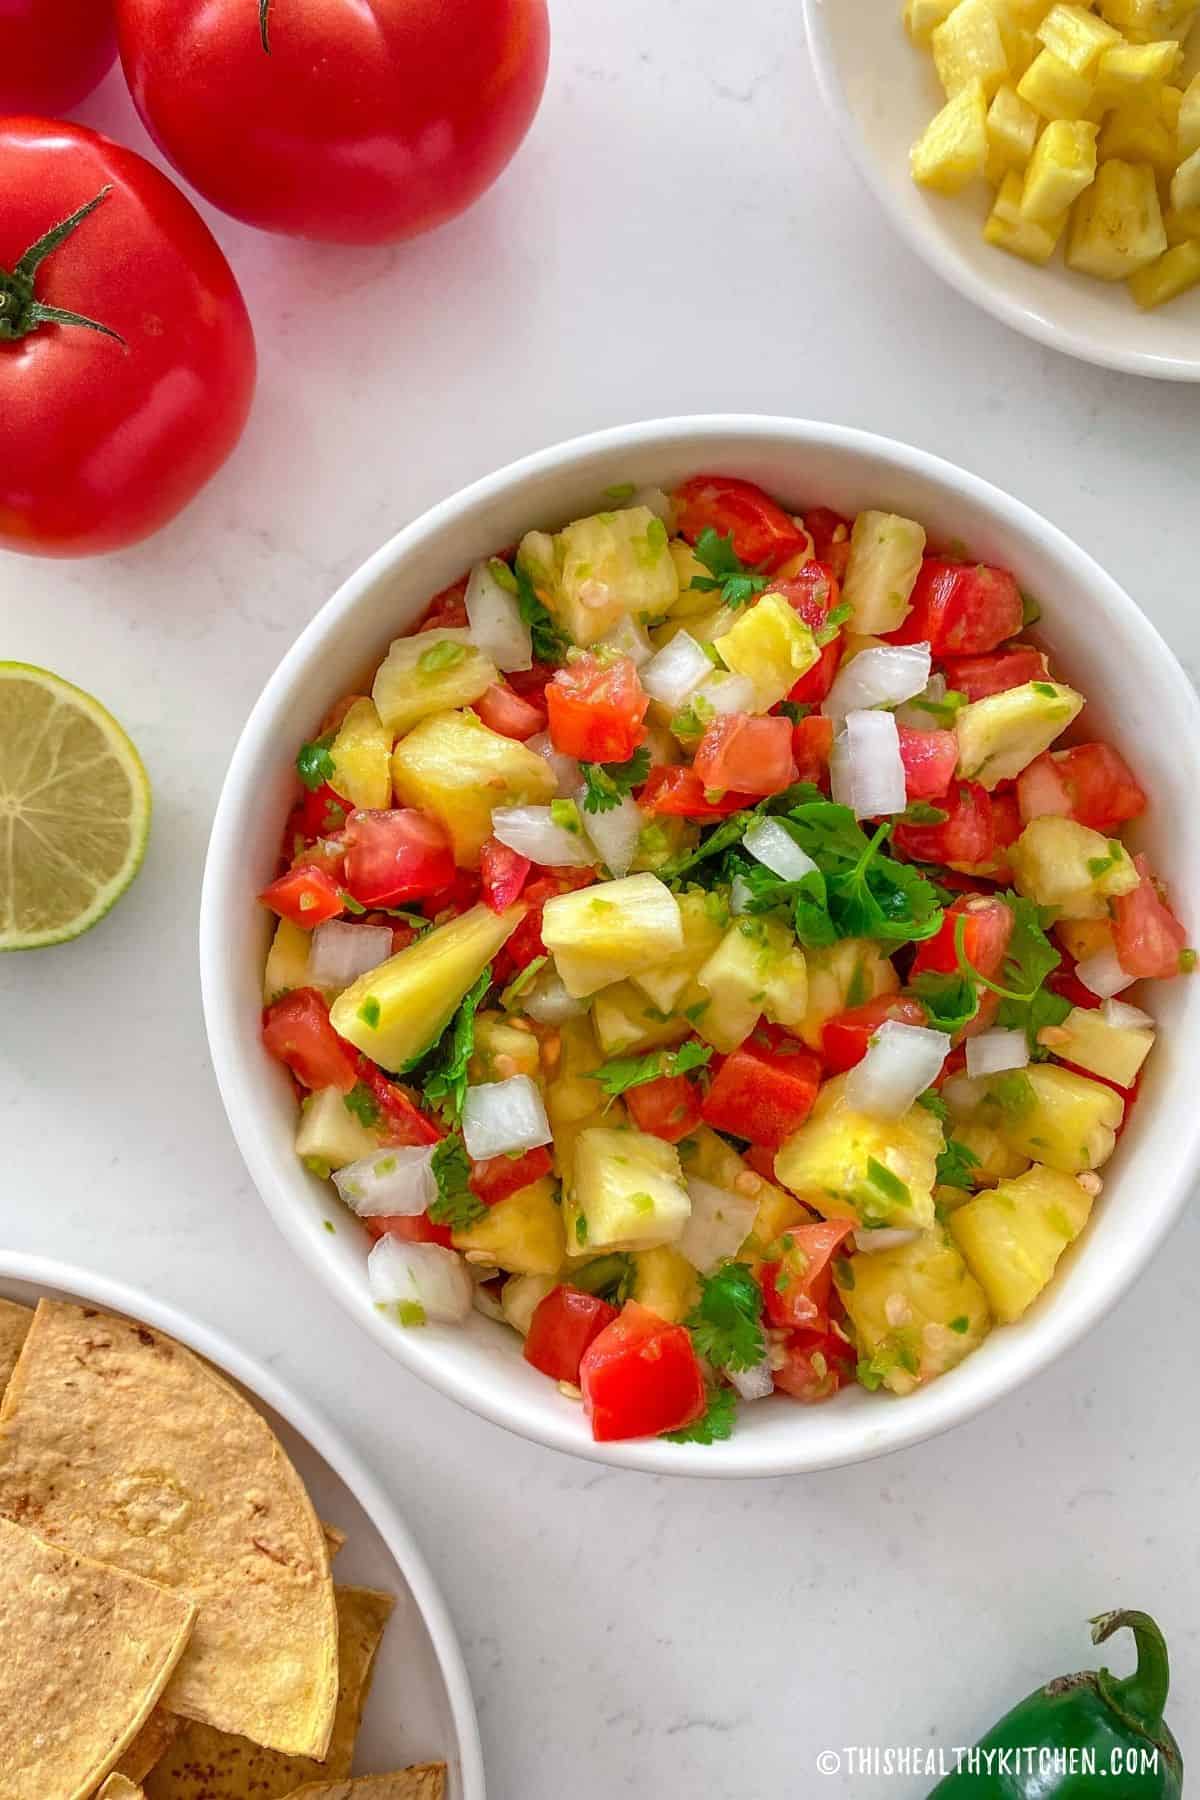 Pineapple pico de gallo in white bowl with plate of tortilla chips beside it.